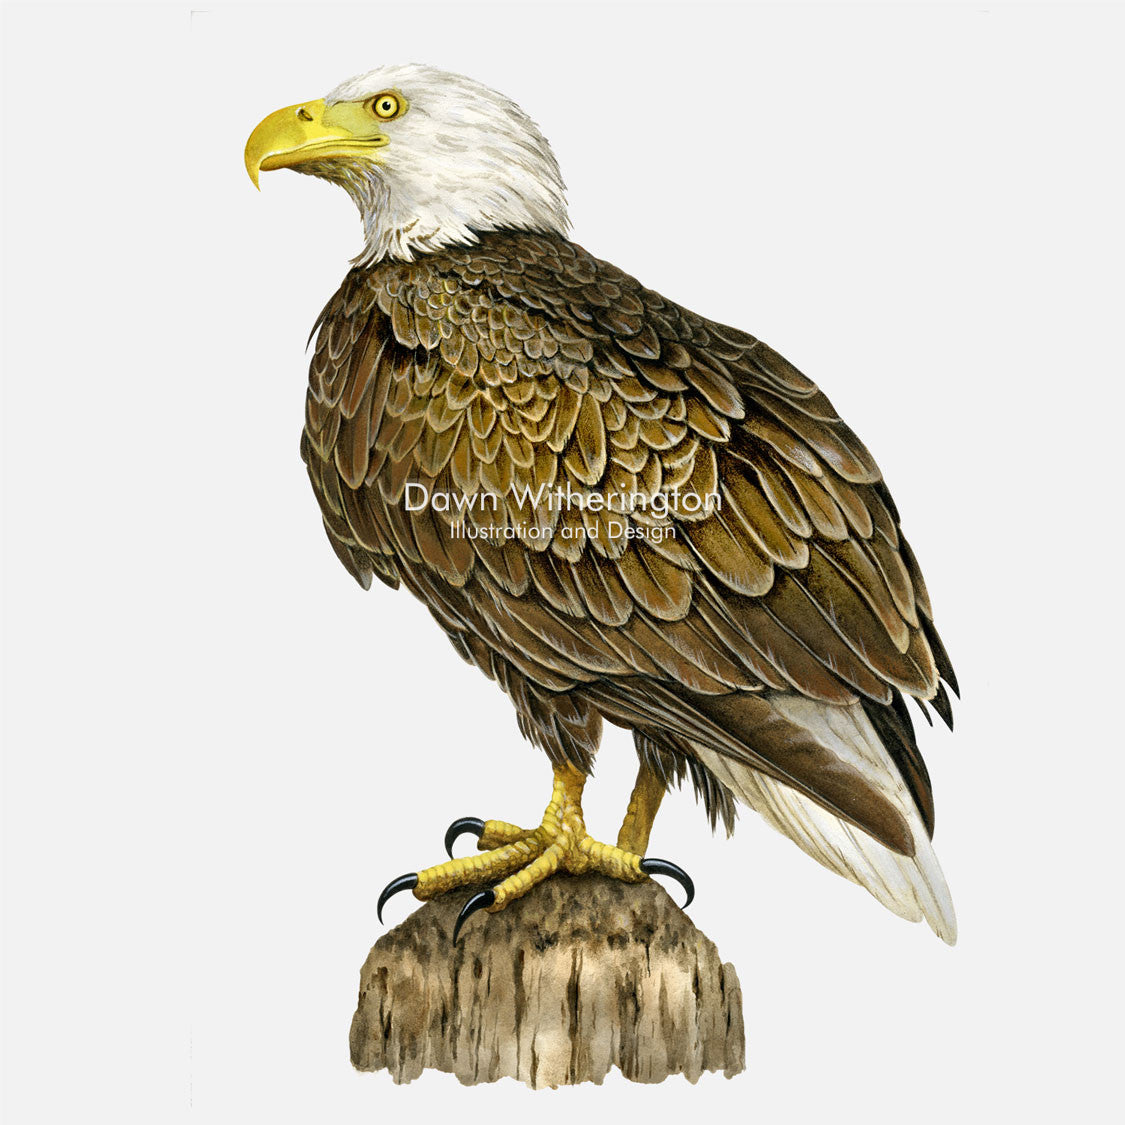 This beautiful illustration of a bald eagle, Haliaeetus leucocephalus, is biologically accurate in detail.